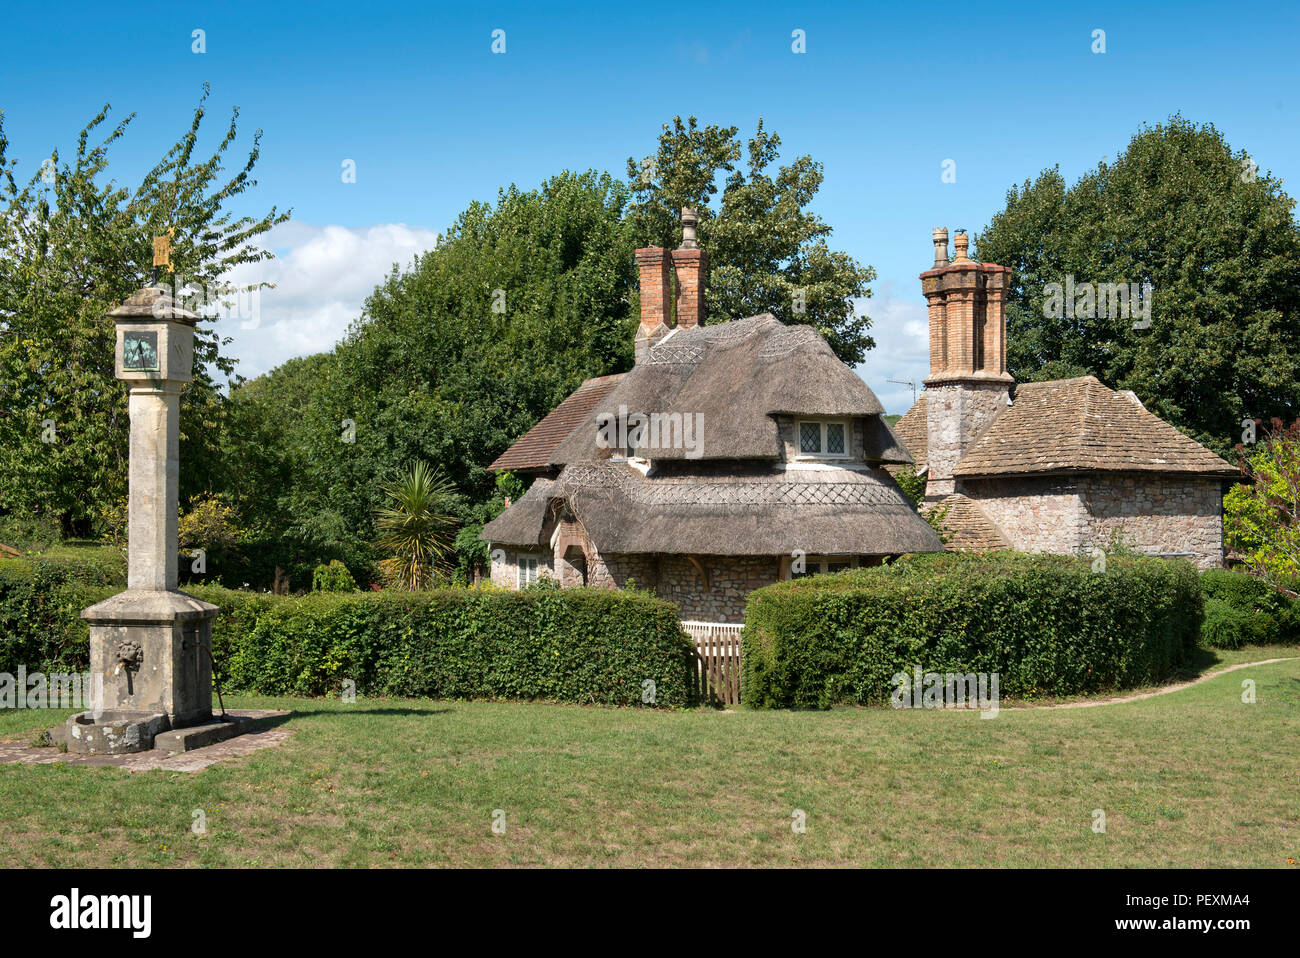 Blaise Hamlet, a group of 9 cottages, grade 1 listed, in Henbury, Bristol, UK.  They were designed by John Nash and built in 1809 for pensioners Stock Photo